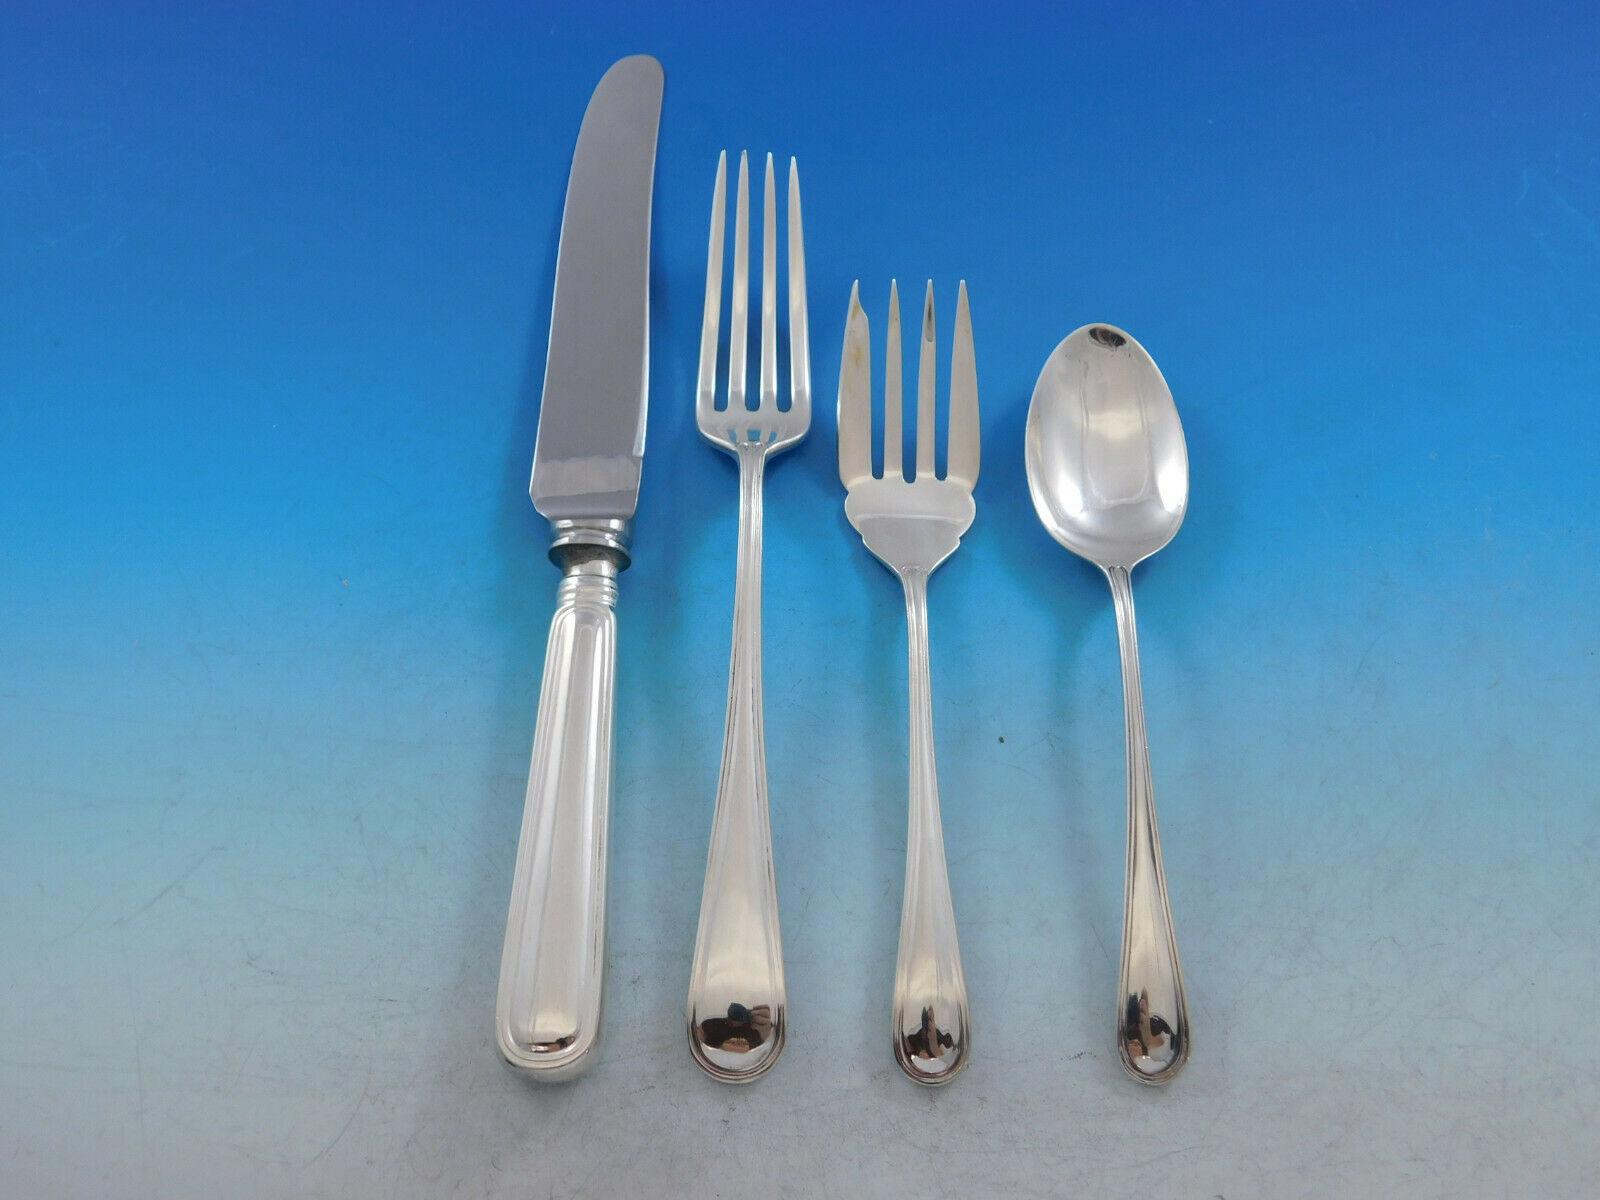 Saxon by Birks Canada sterling silver flatware set, 63 Pieces. This set includes:

8 regular knives, 8 3/4